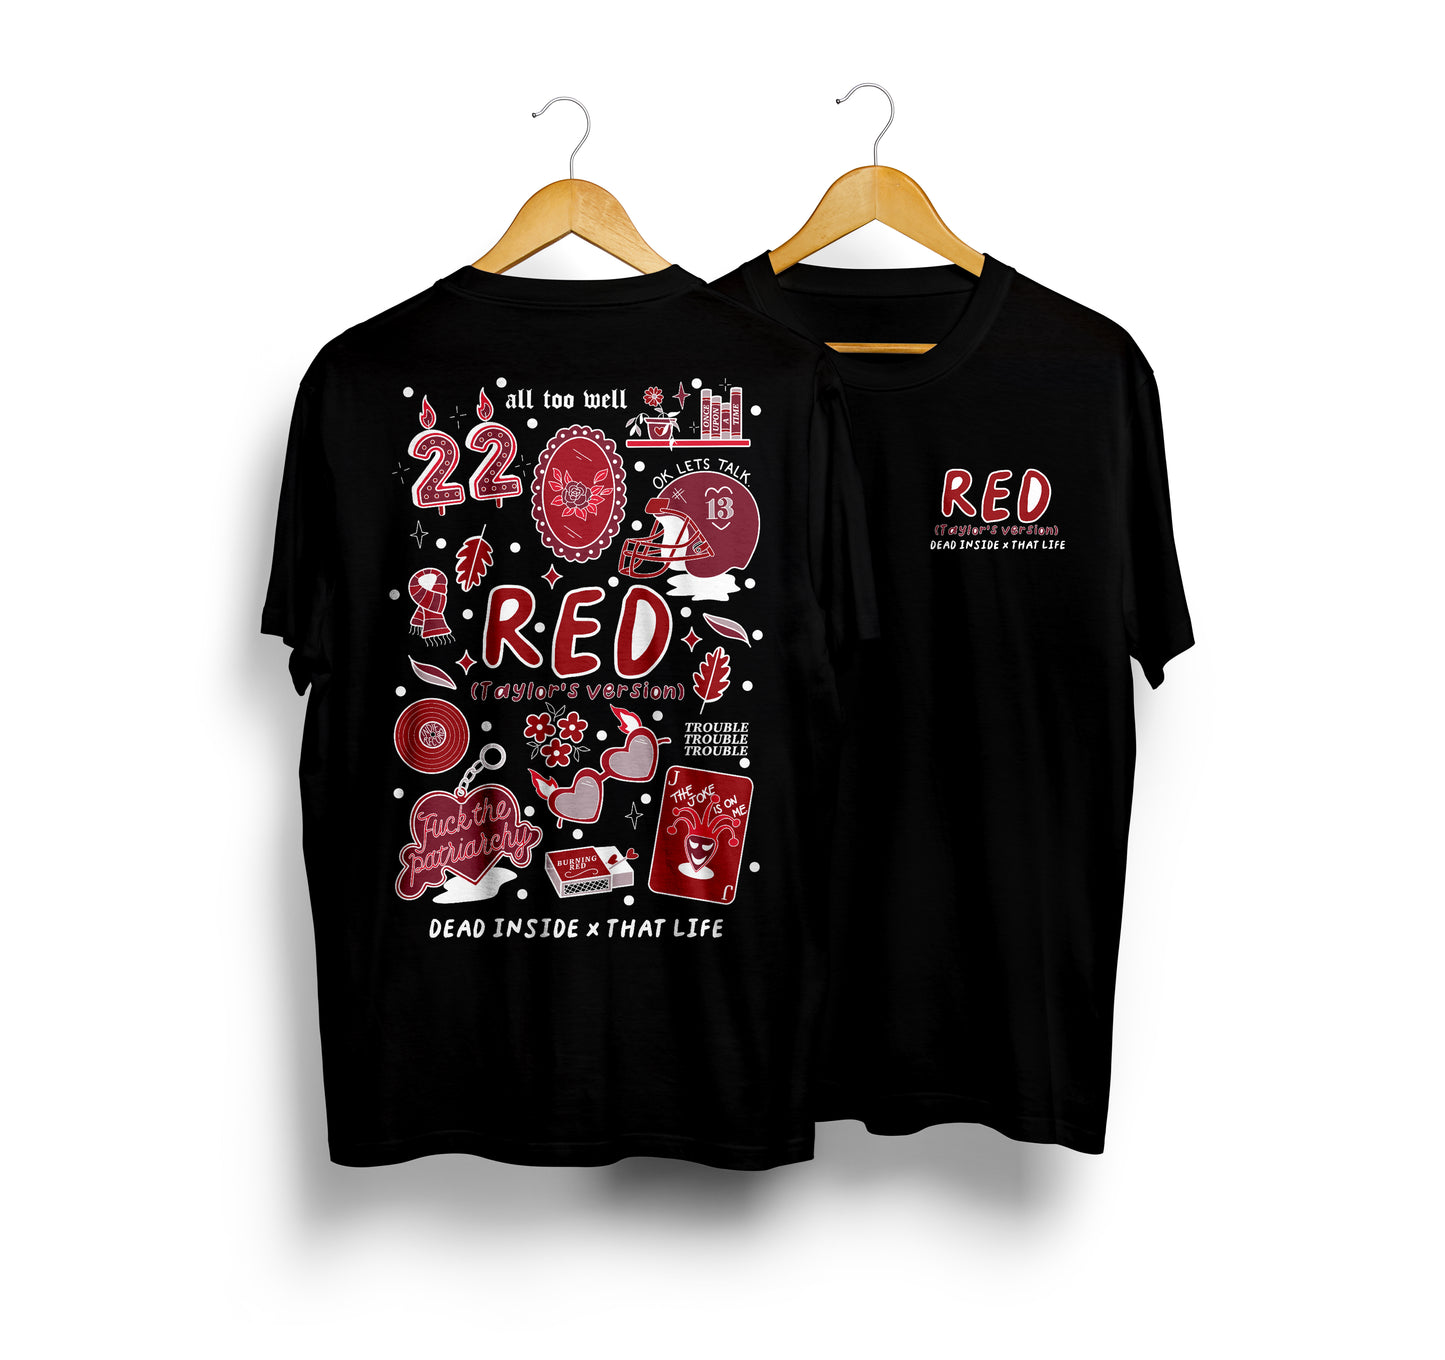 Red (Taylor's Version) Black Tee